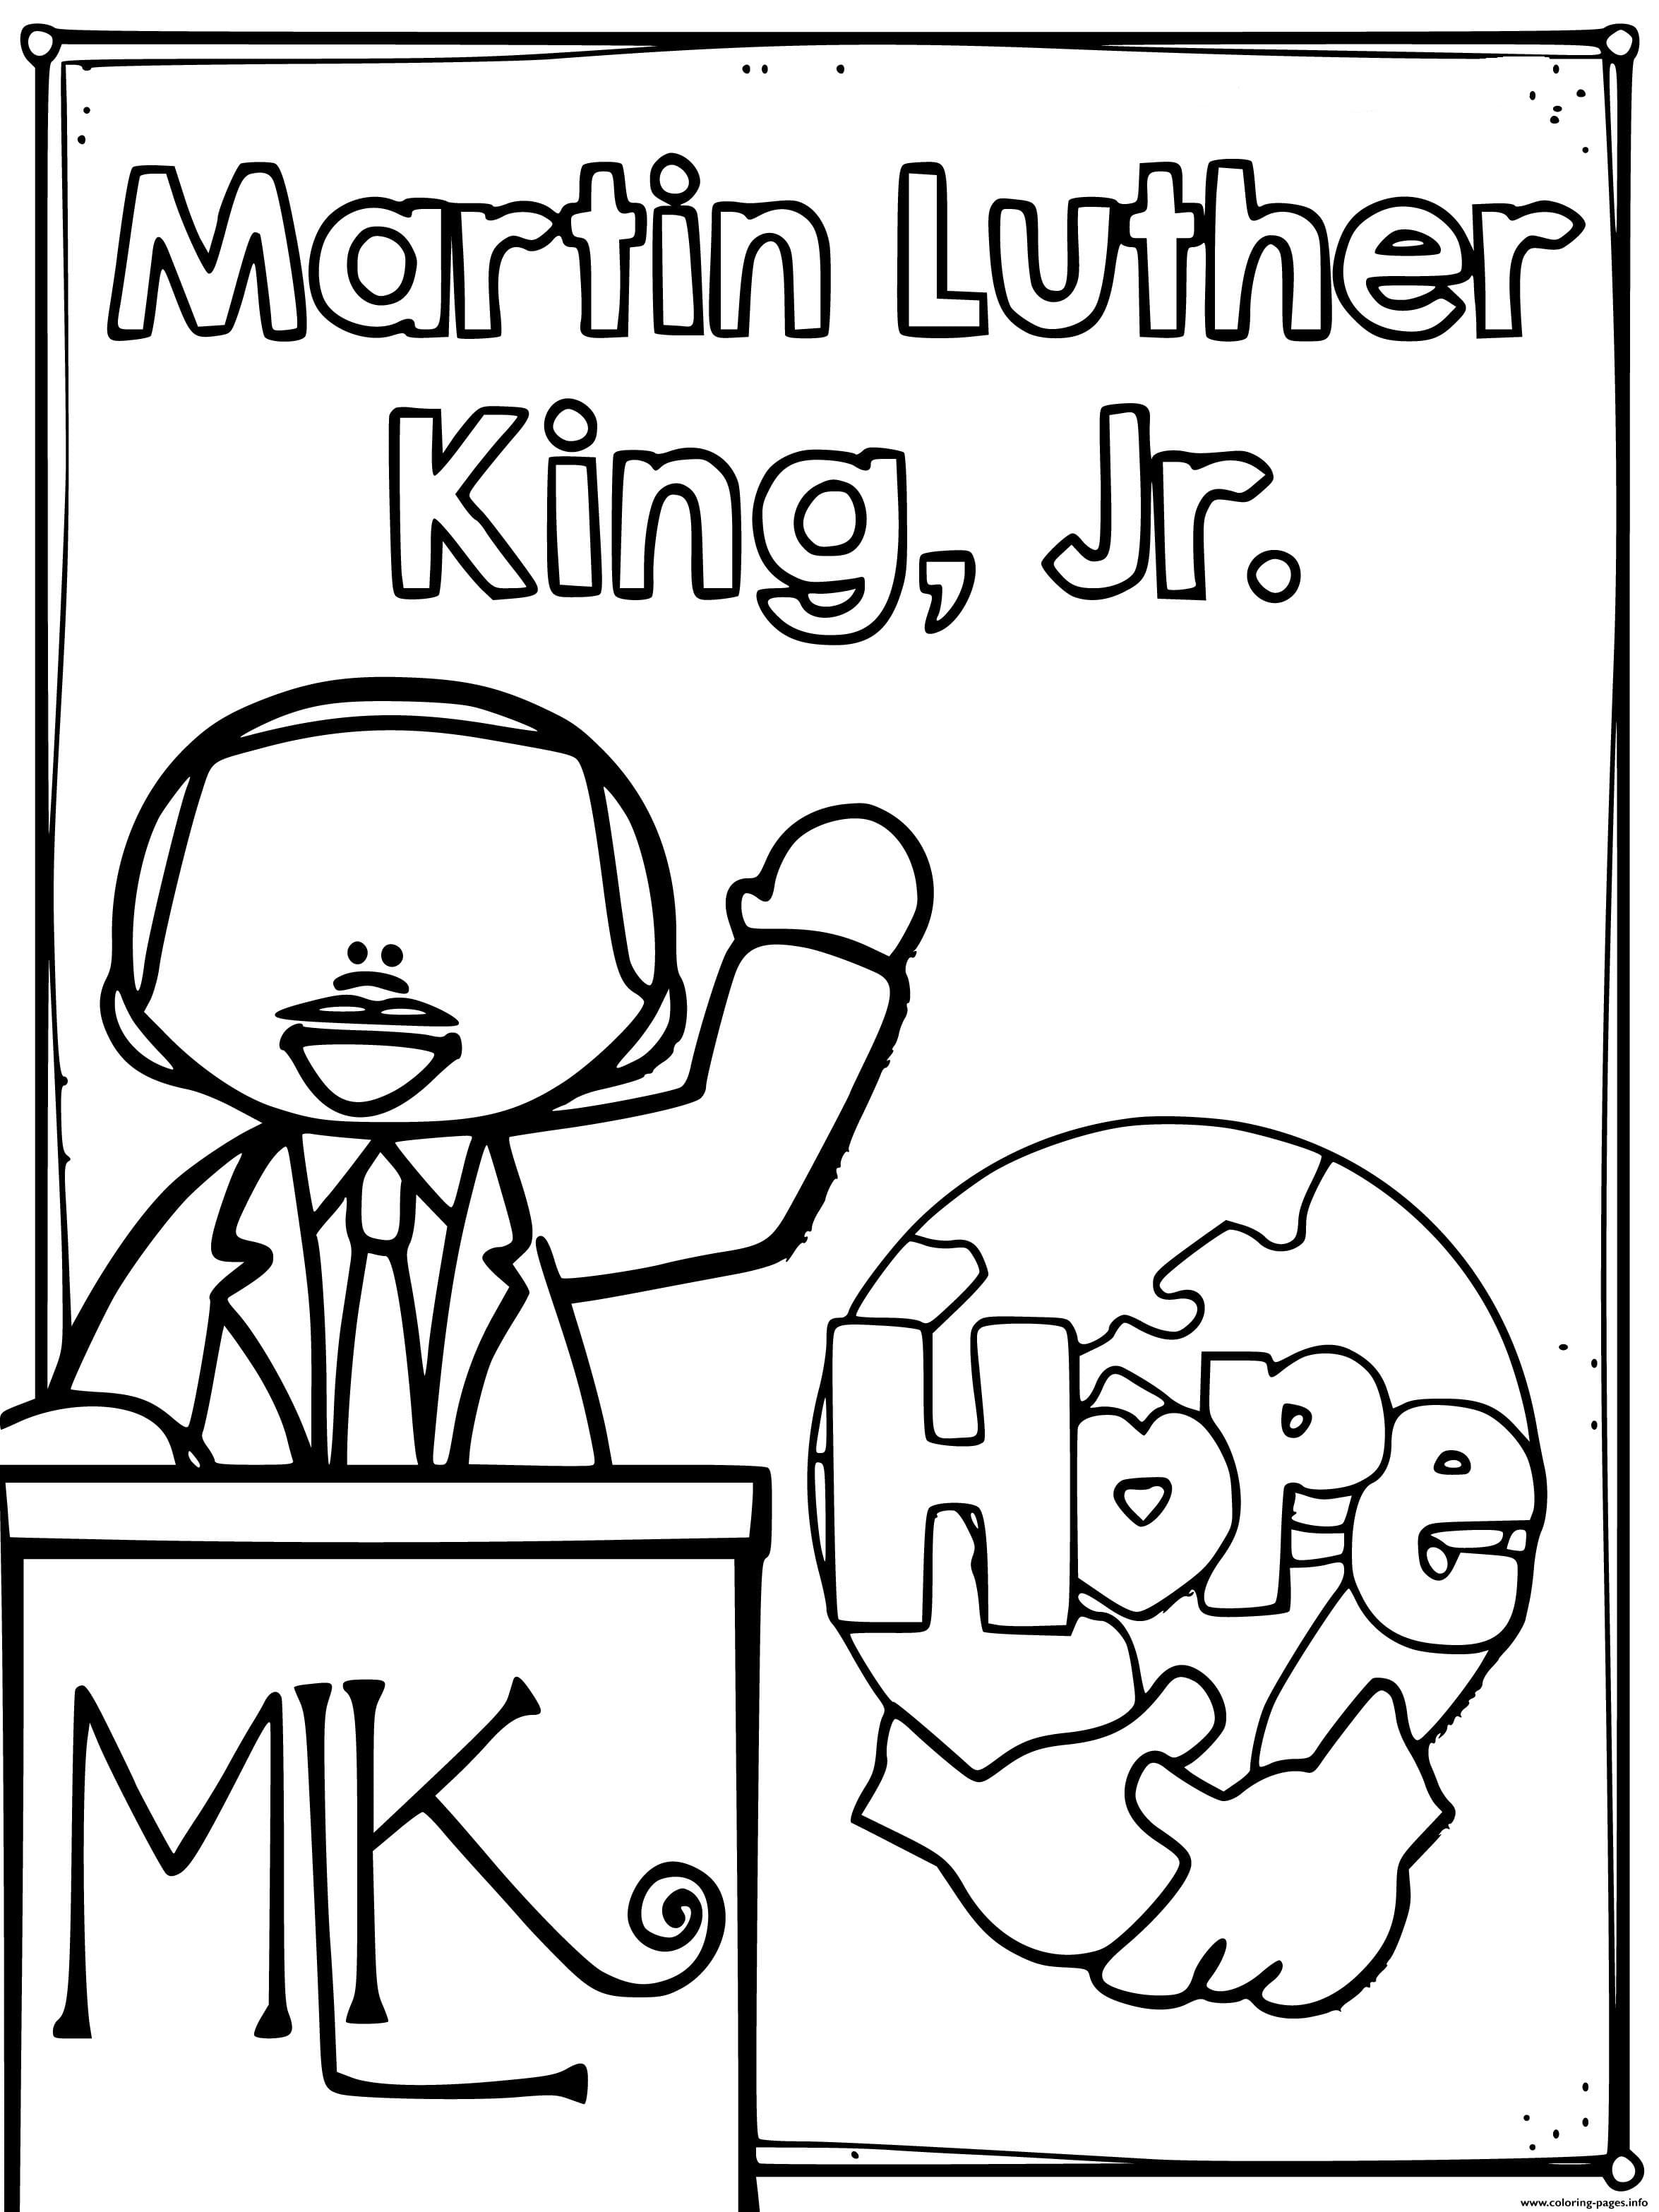 martin-luther-king-jr-day-coloring-pages-print-for-free